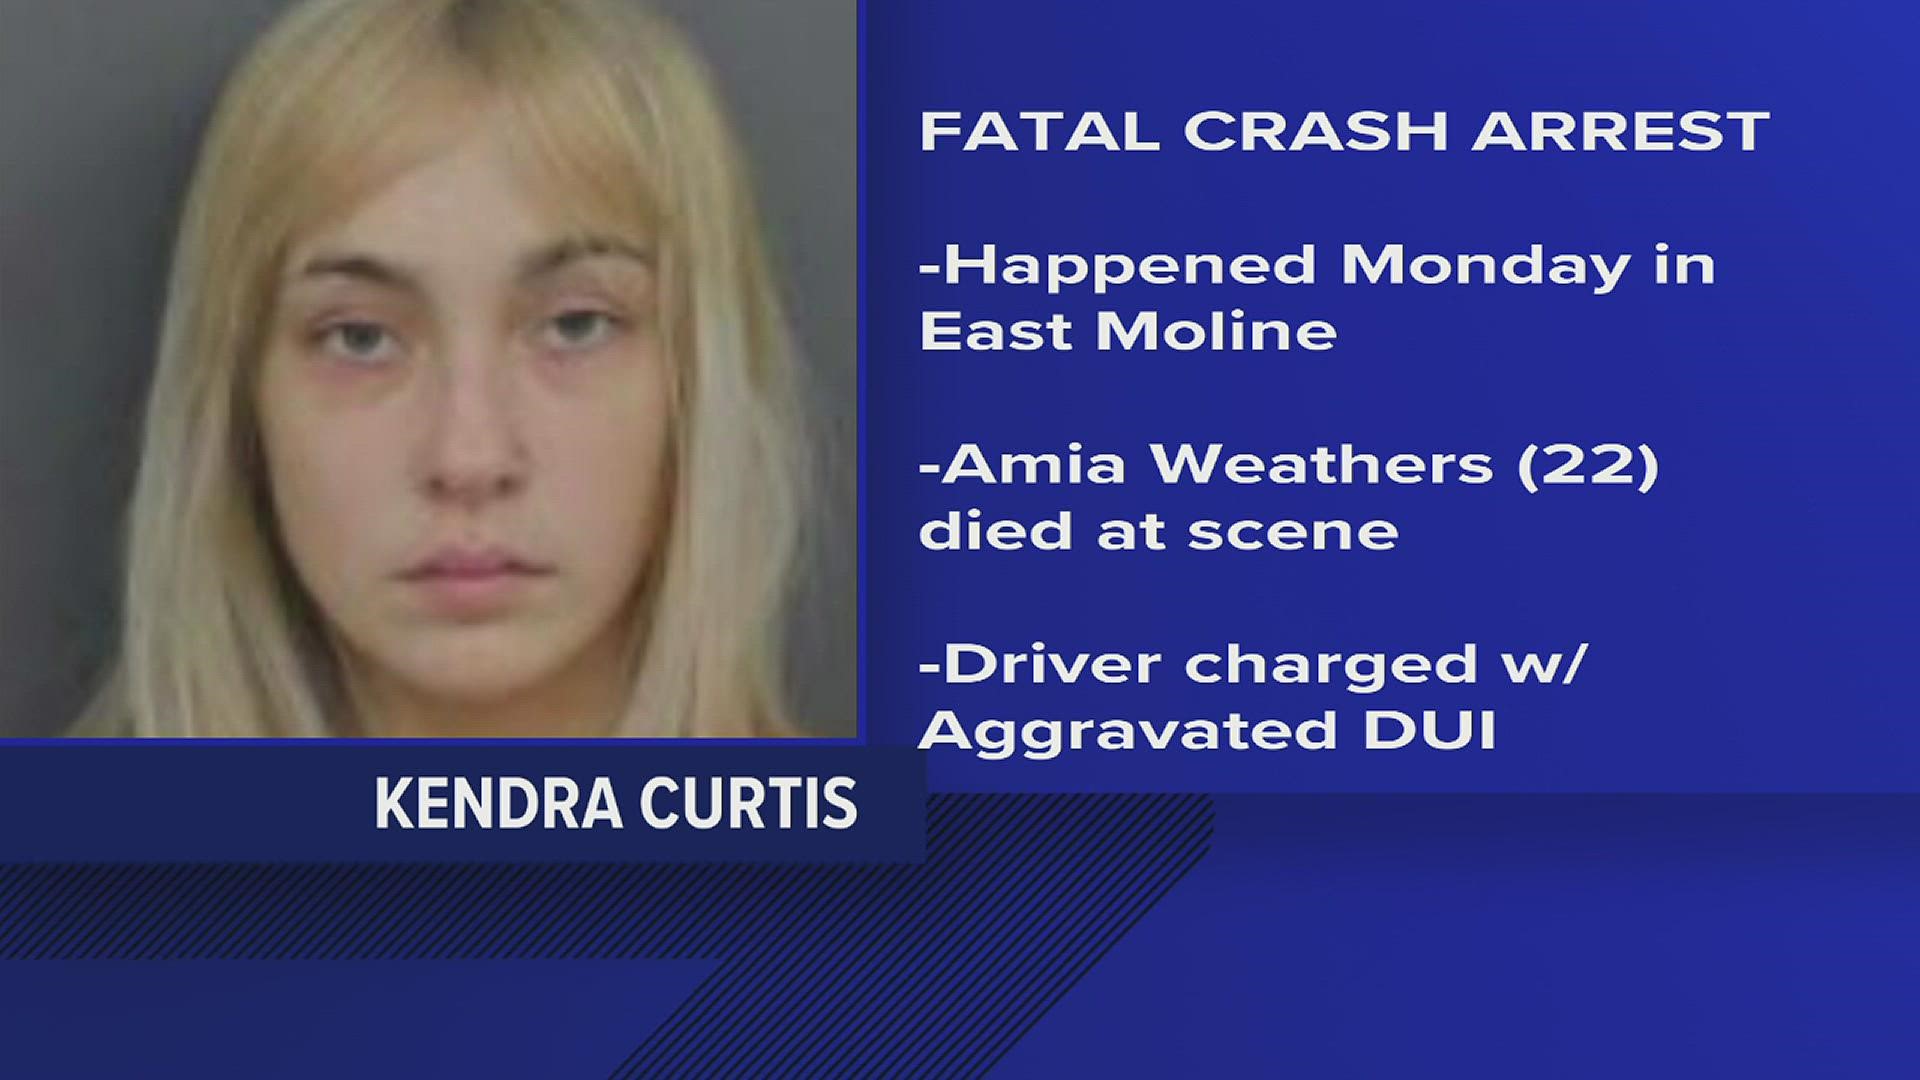 The Moline woman is charged with DUI for the crash that killed 22-year-old Amia Weathers on Nov. 7.